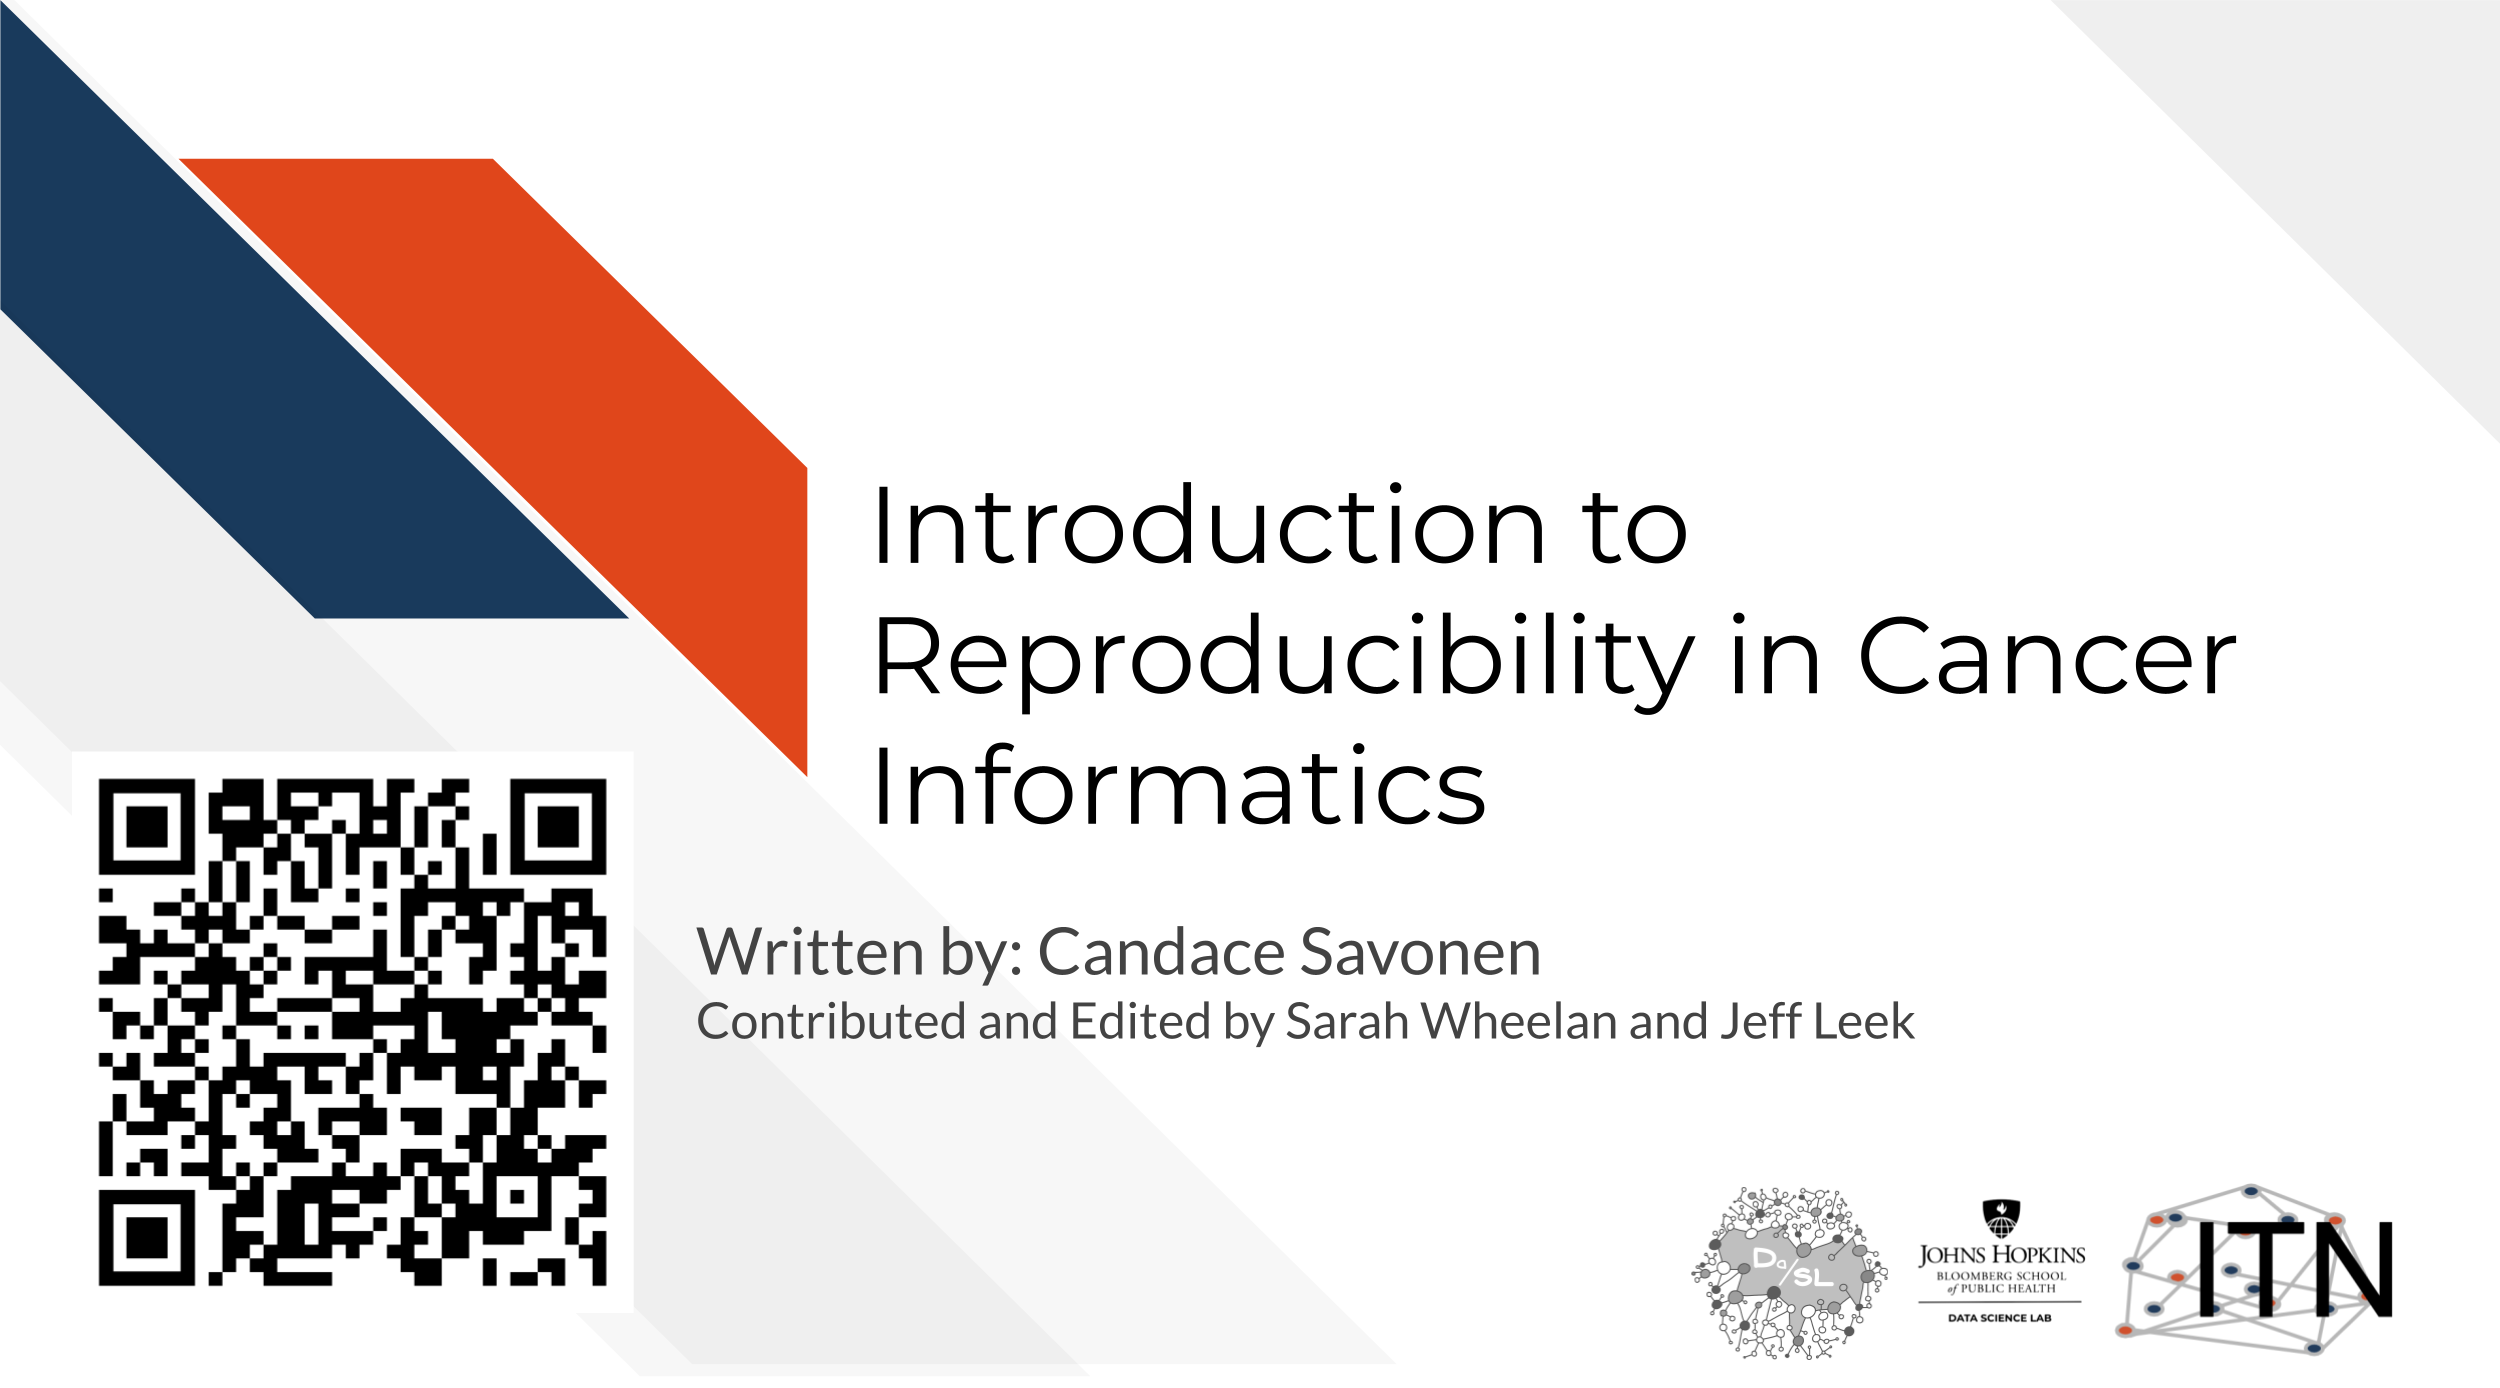 Title image: Reproducibility in Cancer Informatics